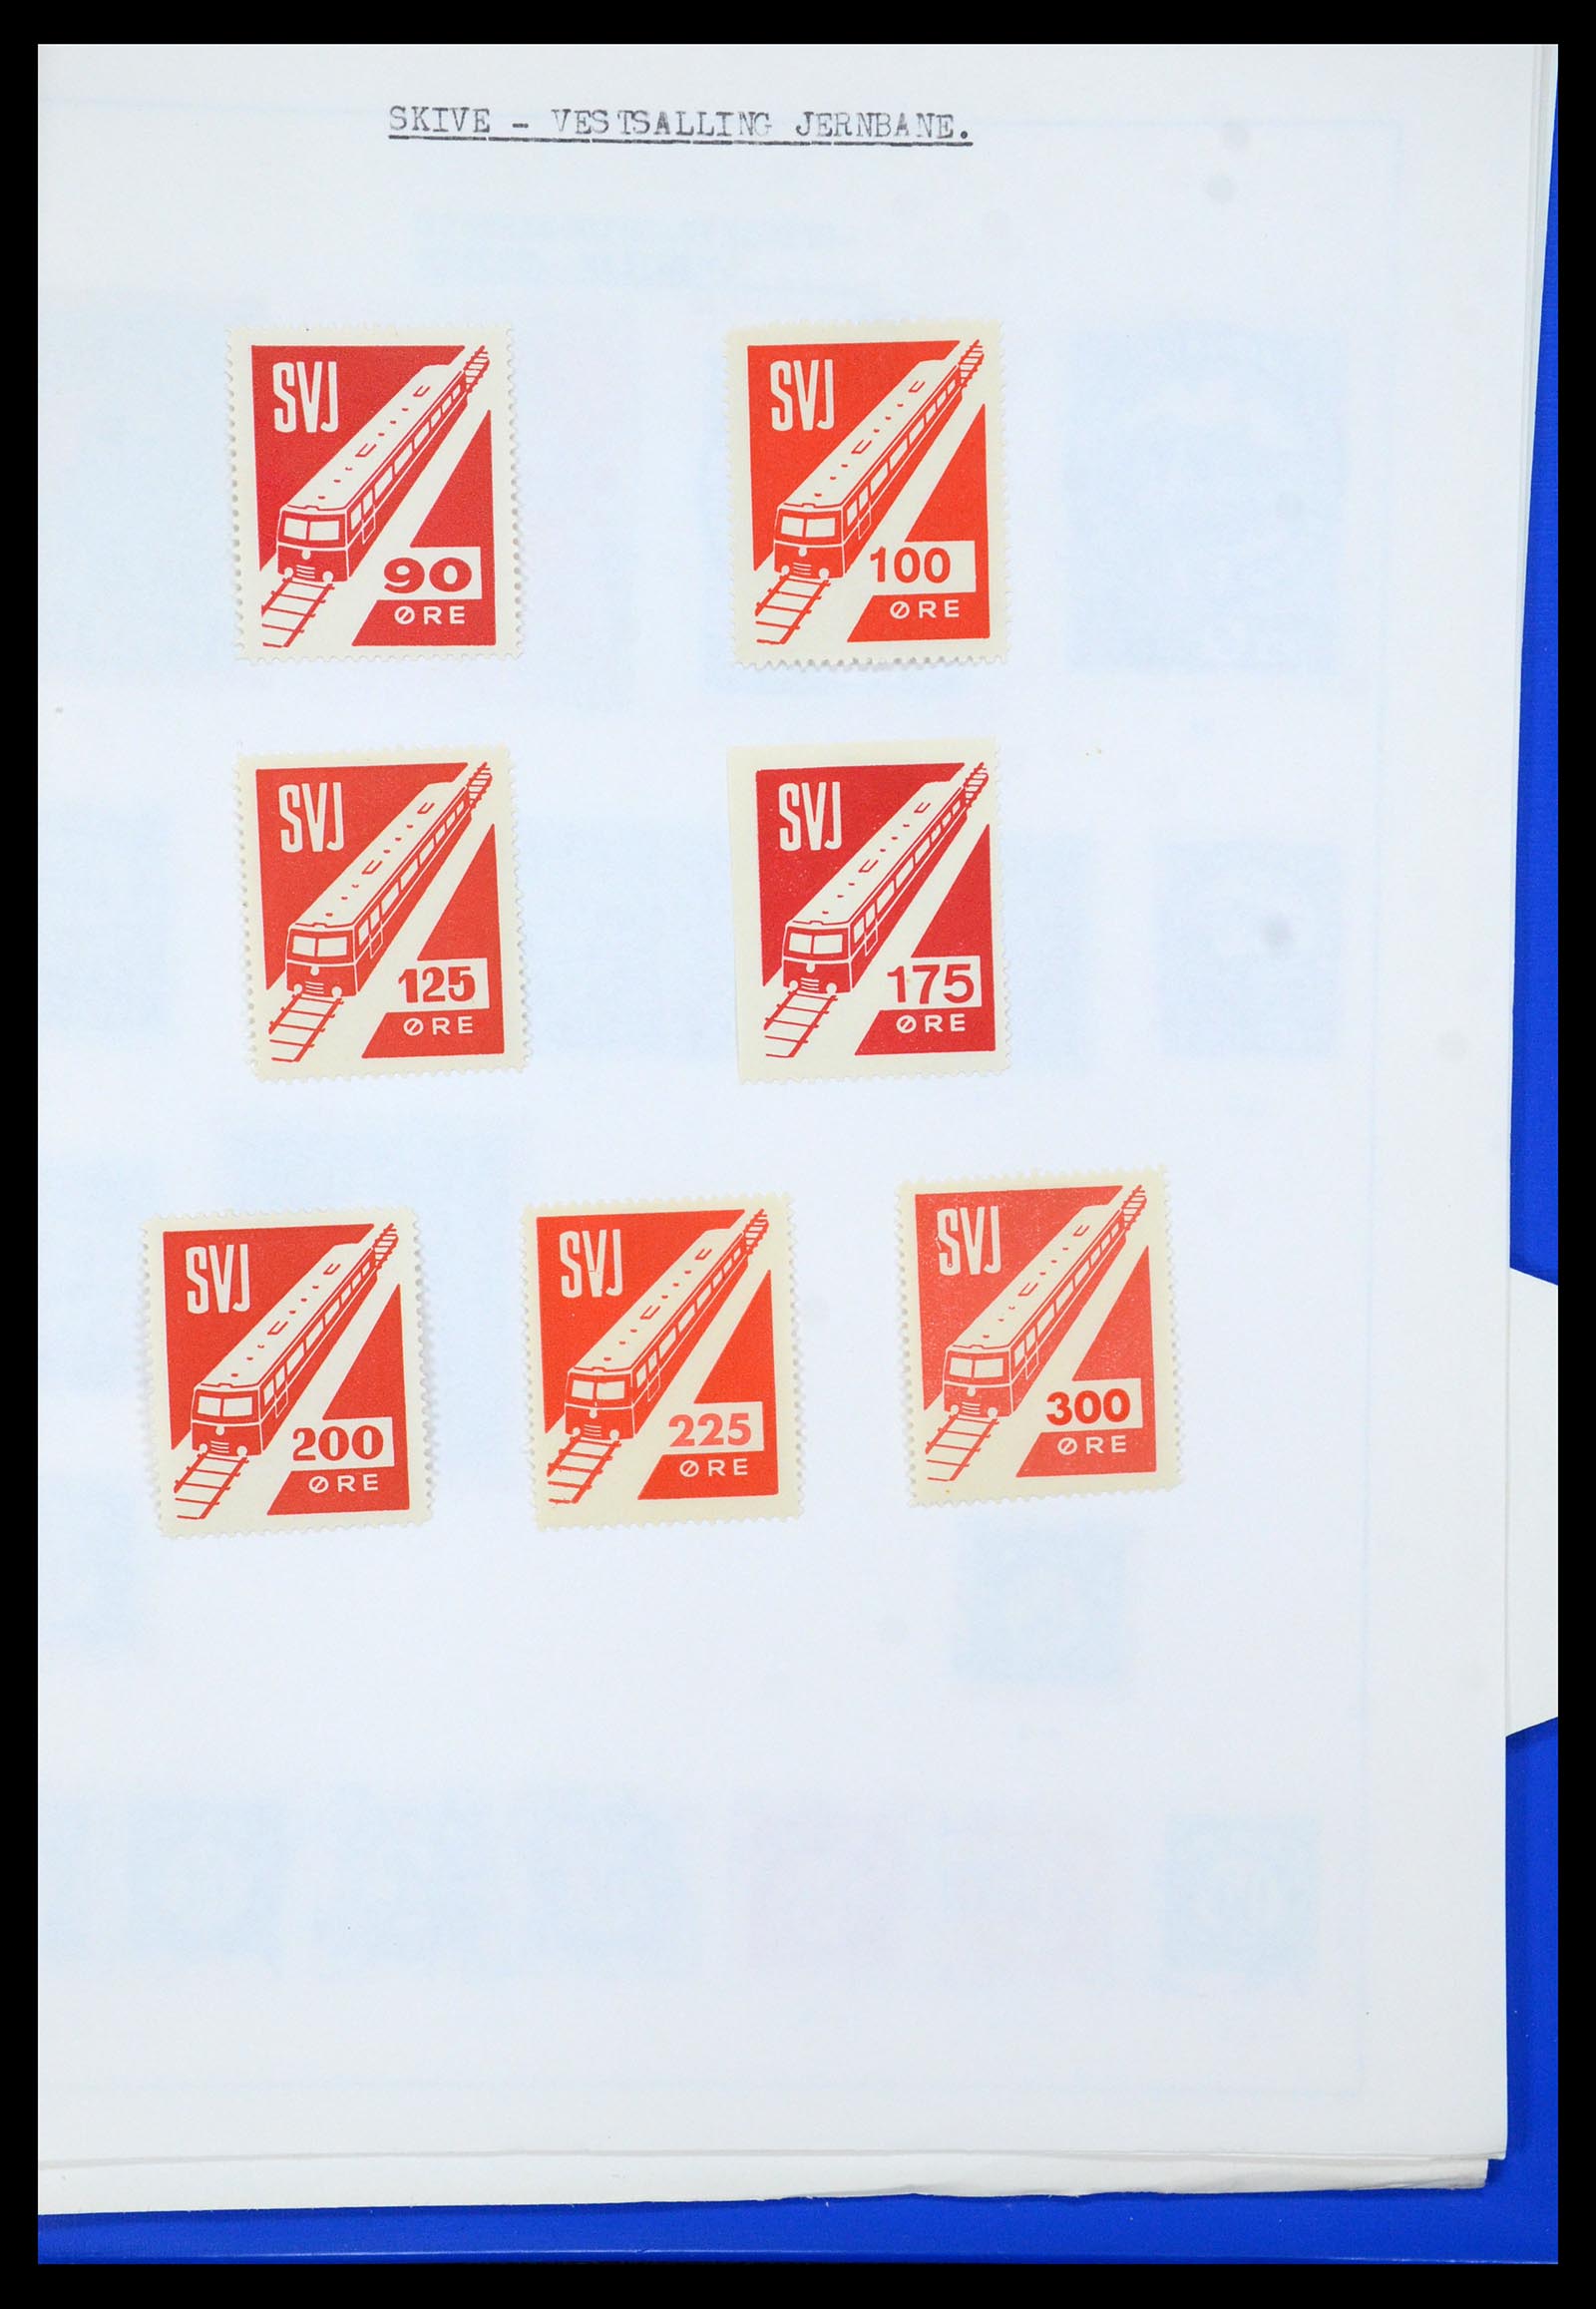 35650 095 - Stamp Collection 35650 Denmark railroad stamps.